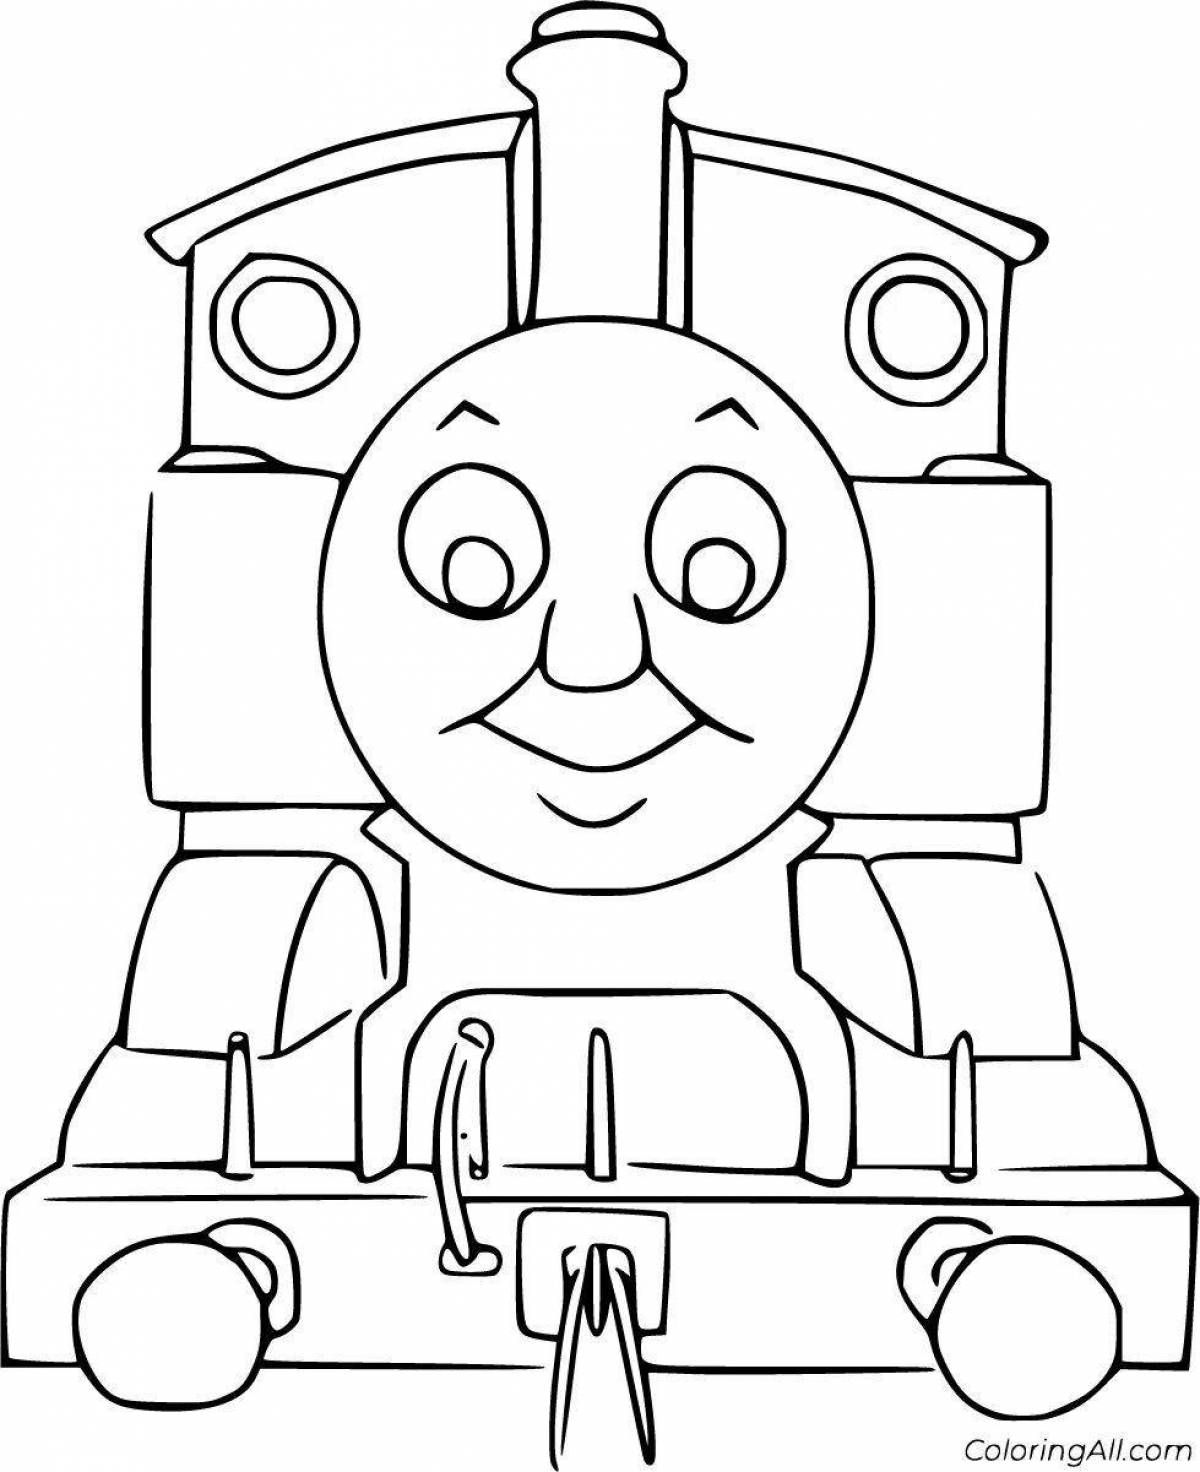 Scary coloring book adorable thomas the tank engine